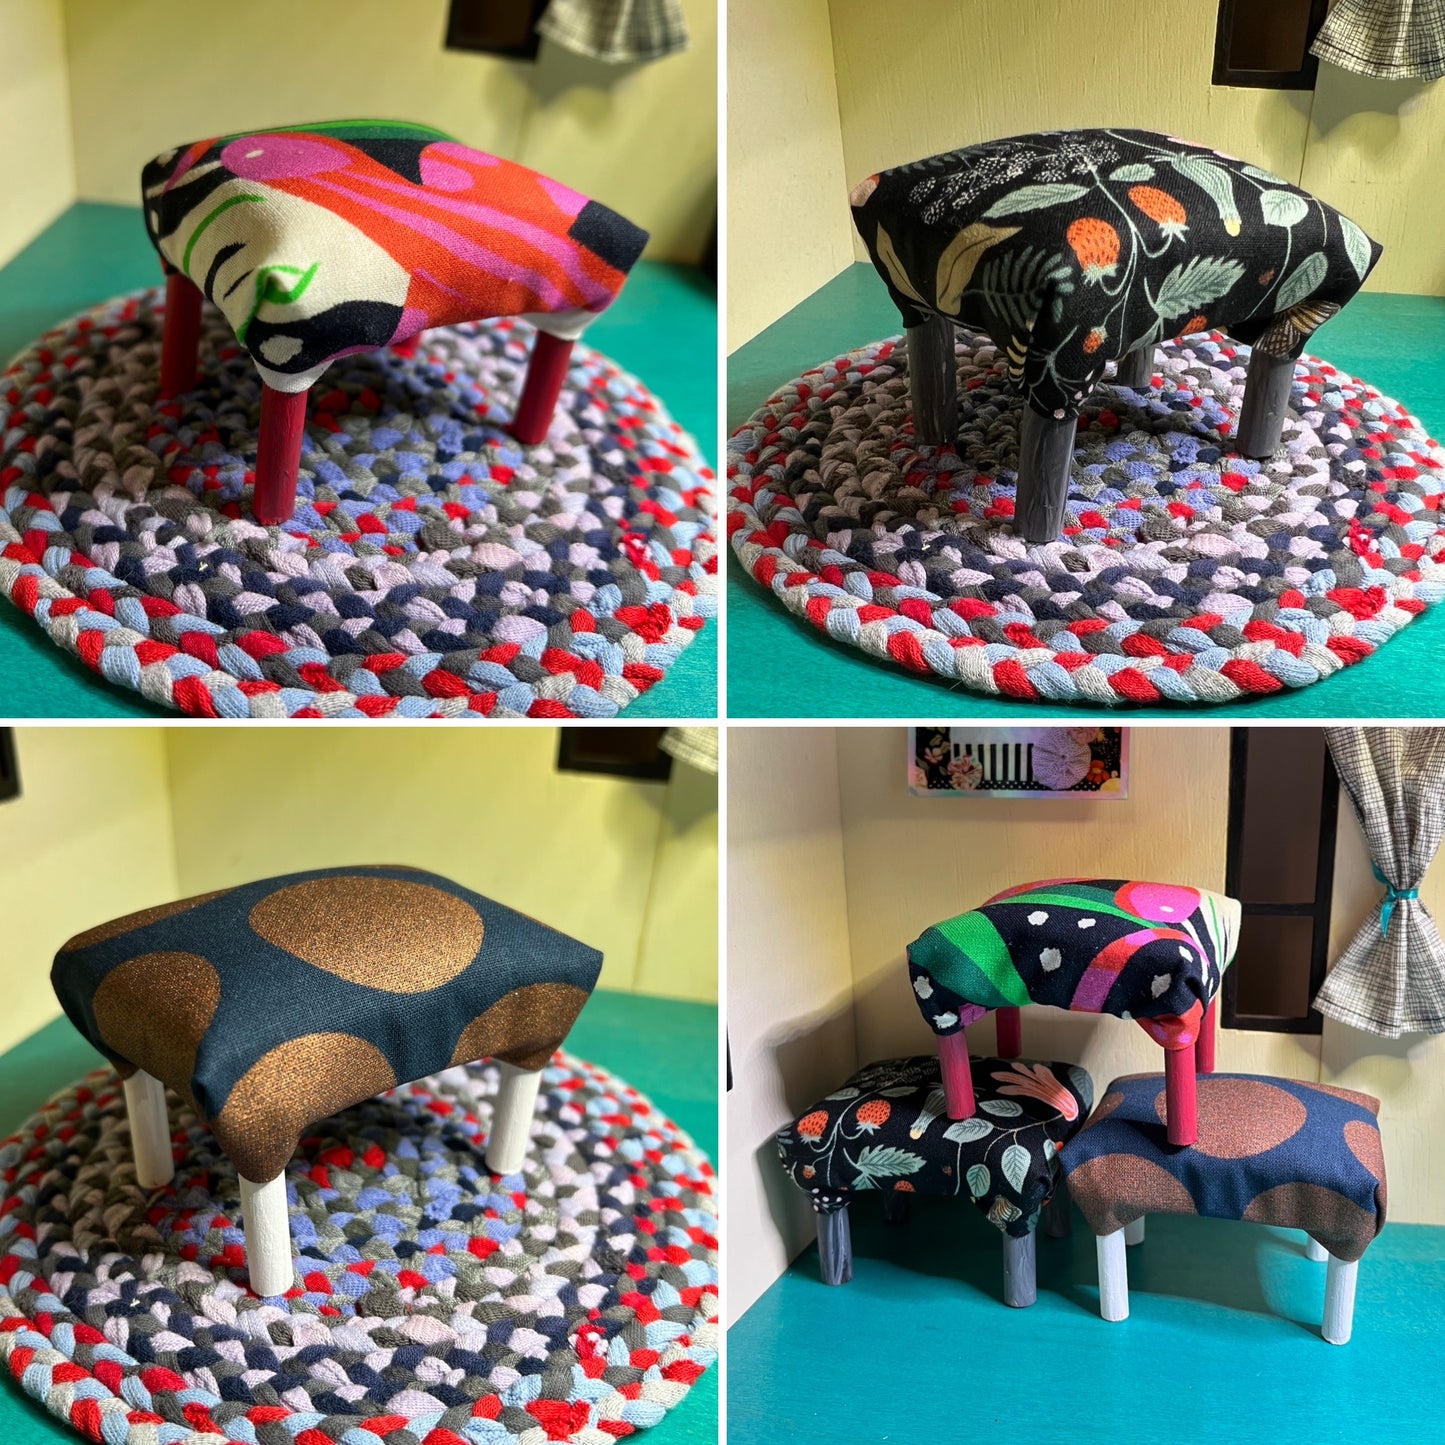 Barbie dollhouse ottomans in a photo grid, each within a miniature roombox